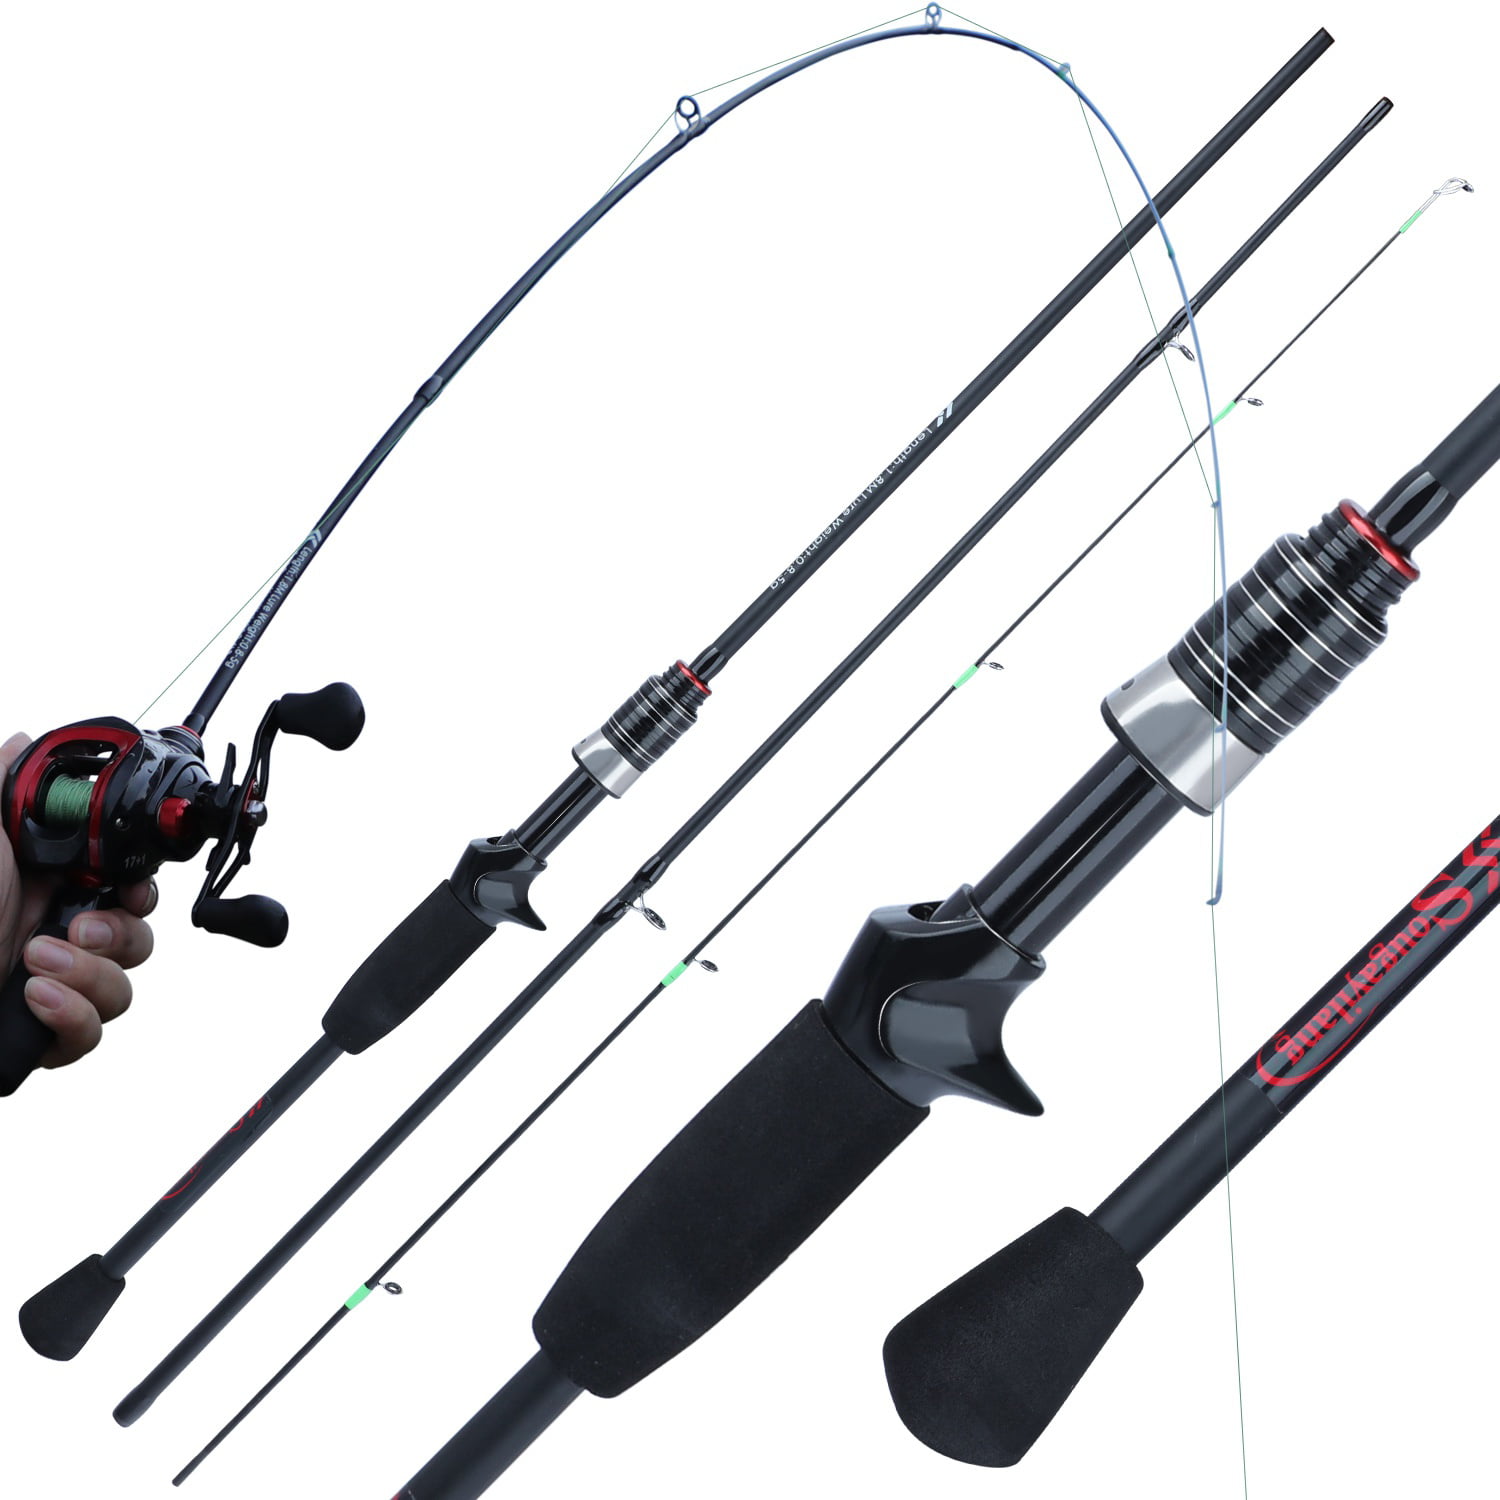 Carbon Fiber Fishing Rods Travel Spinning Lure Rod Sea Saltwater Pole 1.8M/5.9ft 